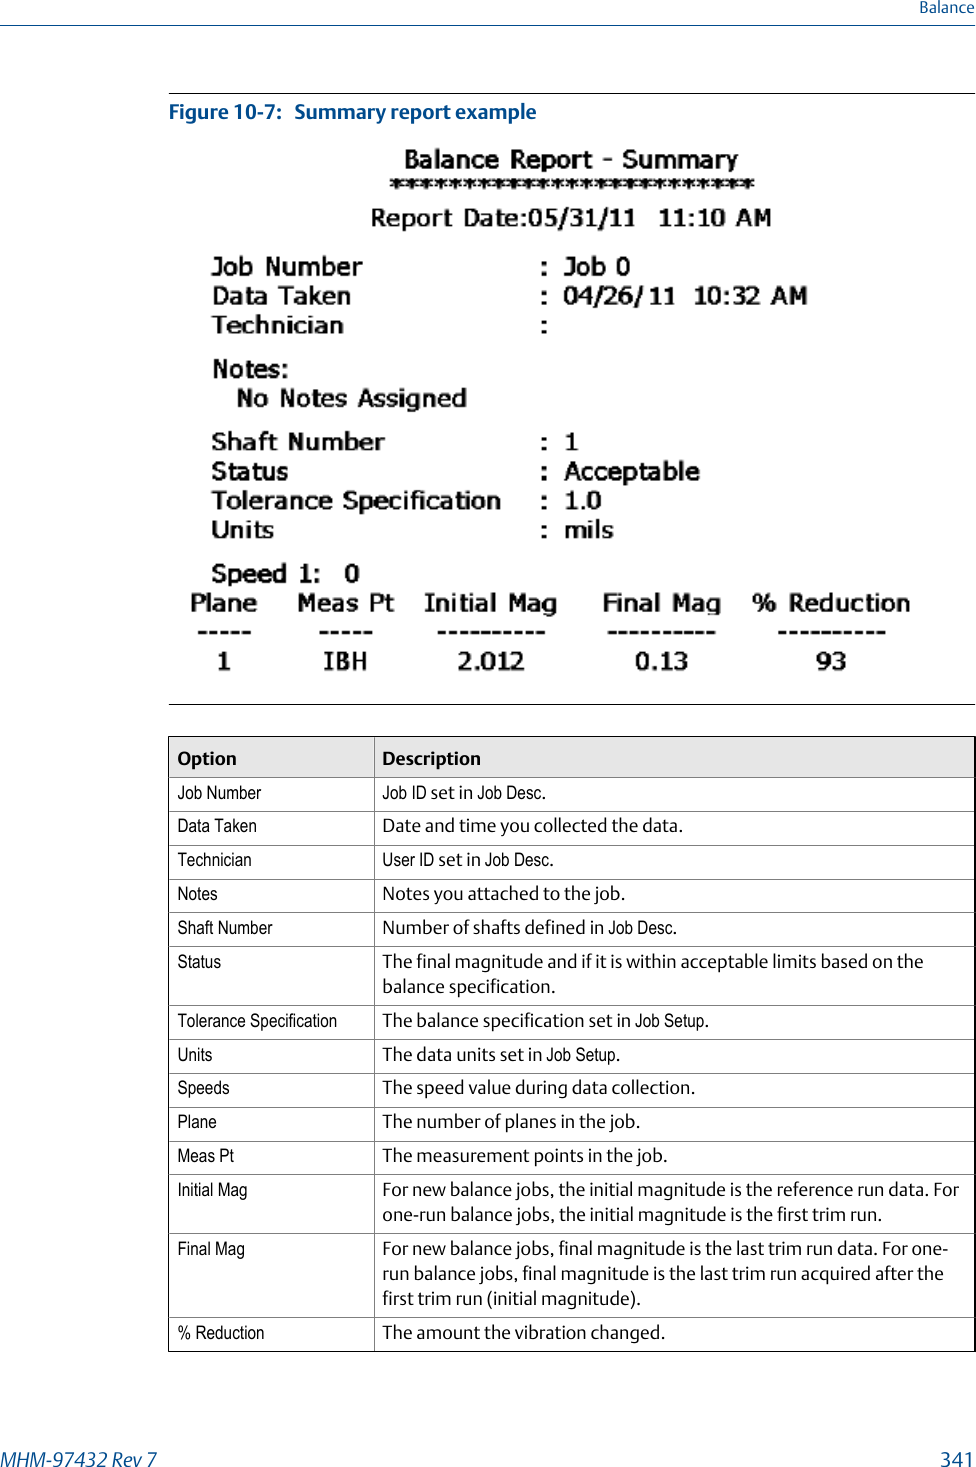 Summary report exampleFigure 10-7:   Option DescriptionJob Number Job ID set in Job Desc.Data Taken Date and time you collected the data.Technician User ID set in Job Desc.Notes Notes you attached to the job.Shaft Number Number of shafts defined in Job Desc.Status The final magnitude and if it is within acceptable limits based on thebalance specification.Tolerance Specification The balance specification set in Job Setup.Units The data units set in Job Setup.Speeds The speed value during data collection.Plane The number of planes in the job.Meas Pt The measurement points in the job.Initial Mag For new balance jobs, the initial magnitude is the reference run data. Forone-run balance jobs, the initial magnitude is the first trim run.Final Mag For new balance jobs, final magnitude is the last trim run data. For one-run balance jobs, final magnitude is the last trim run acquired after thefirst trim run (initial magnitude).% Reduction The amount the vibration changed.BalanceMHM-97432 Rev 7  341